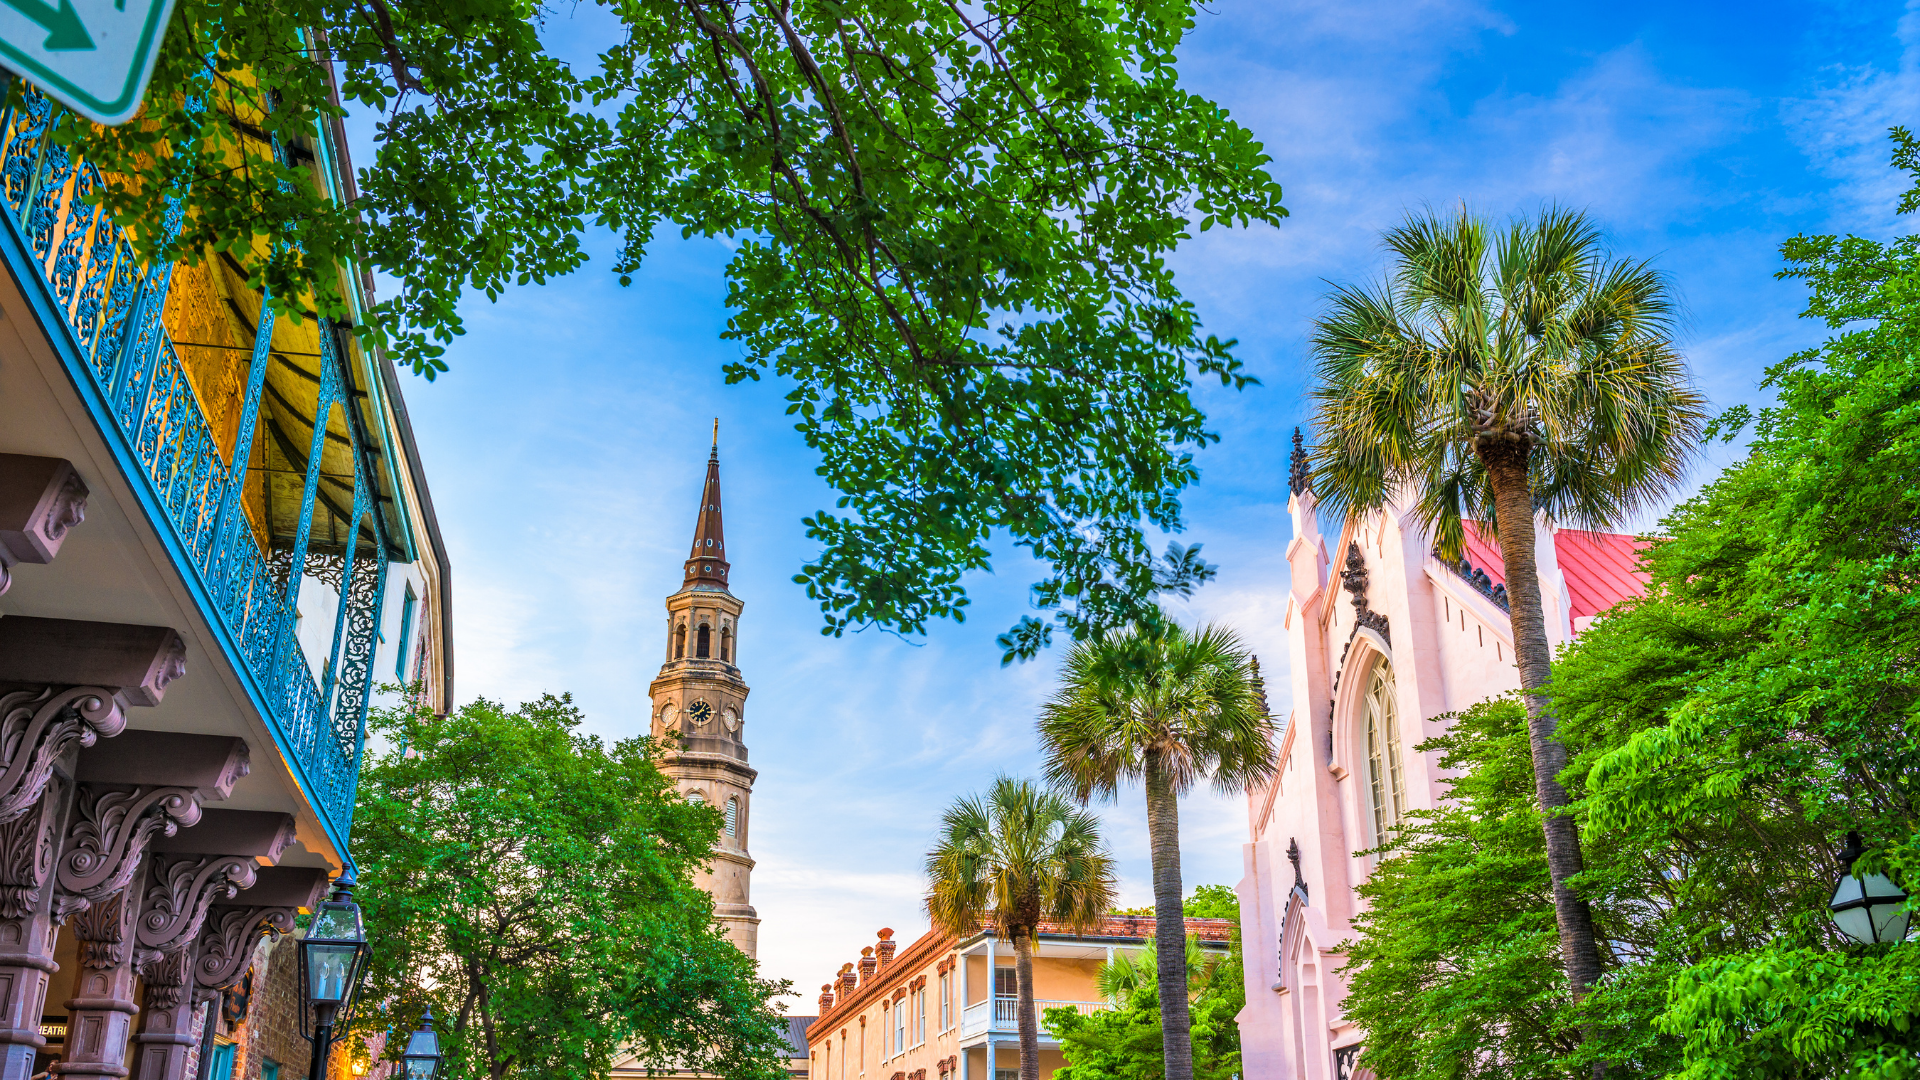 Charleston - A Southern Town with Charm